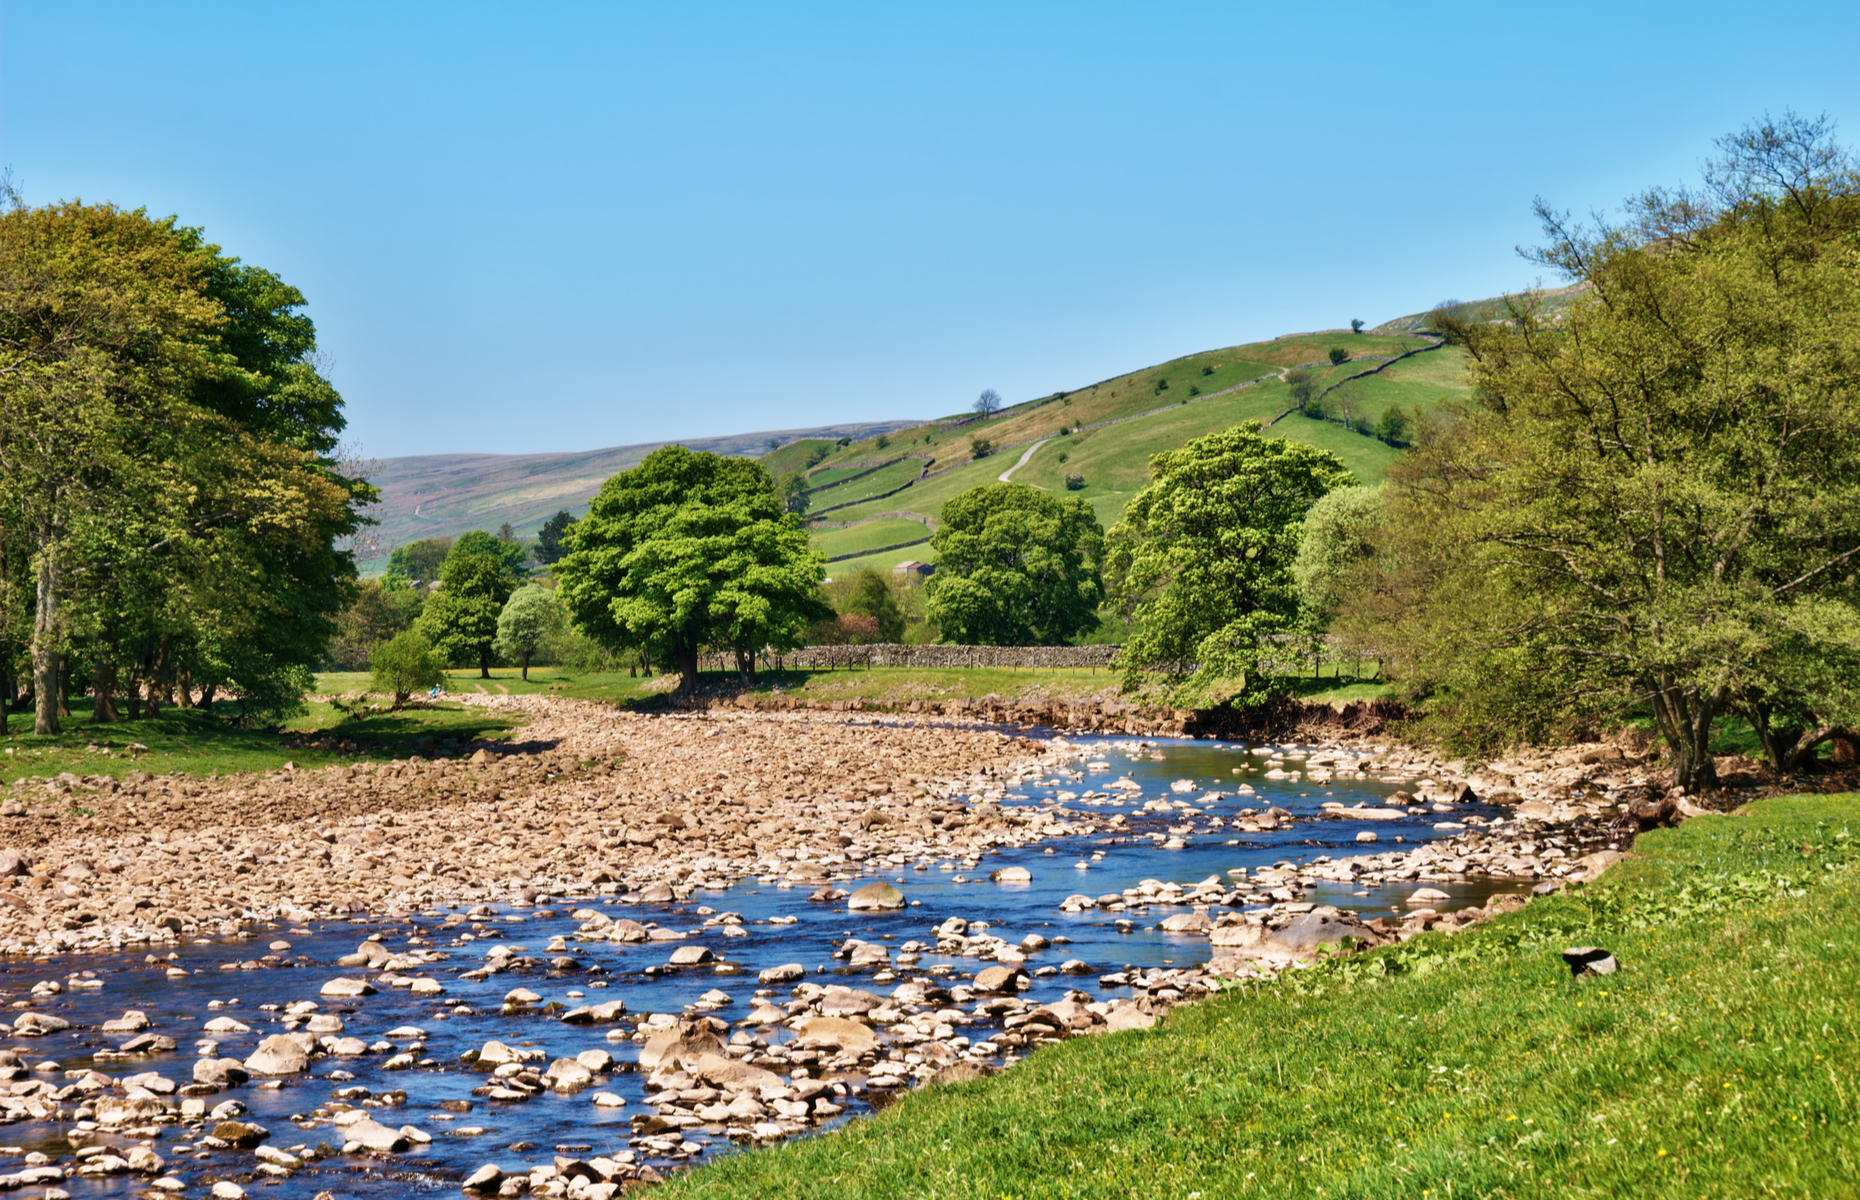 Swale River in Yorkshire (image:Kevin Eaves/Shutterstock)